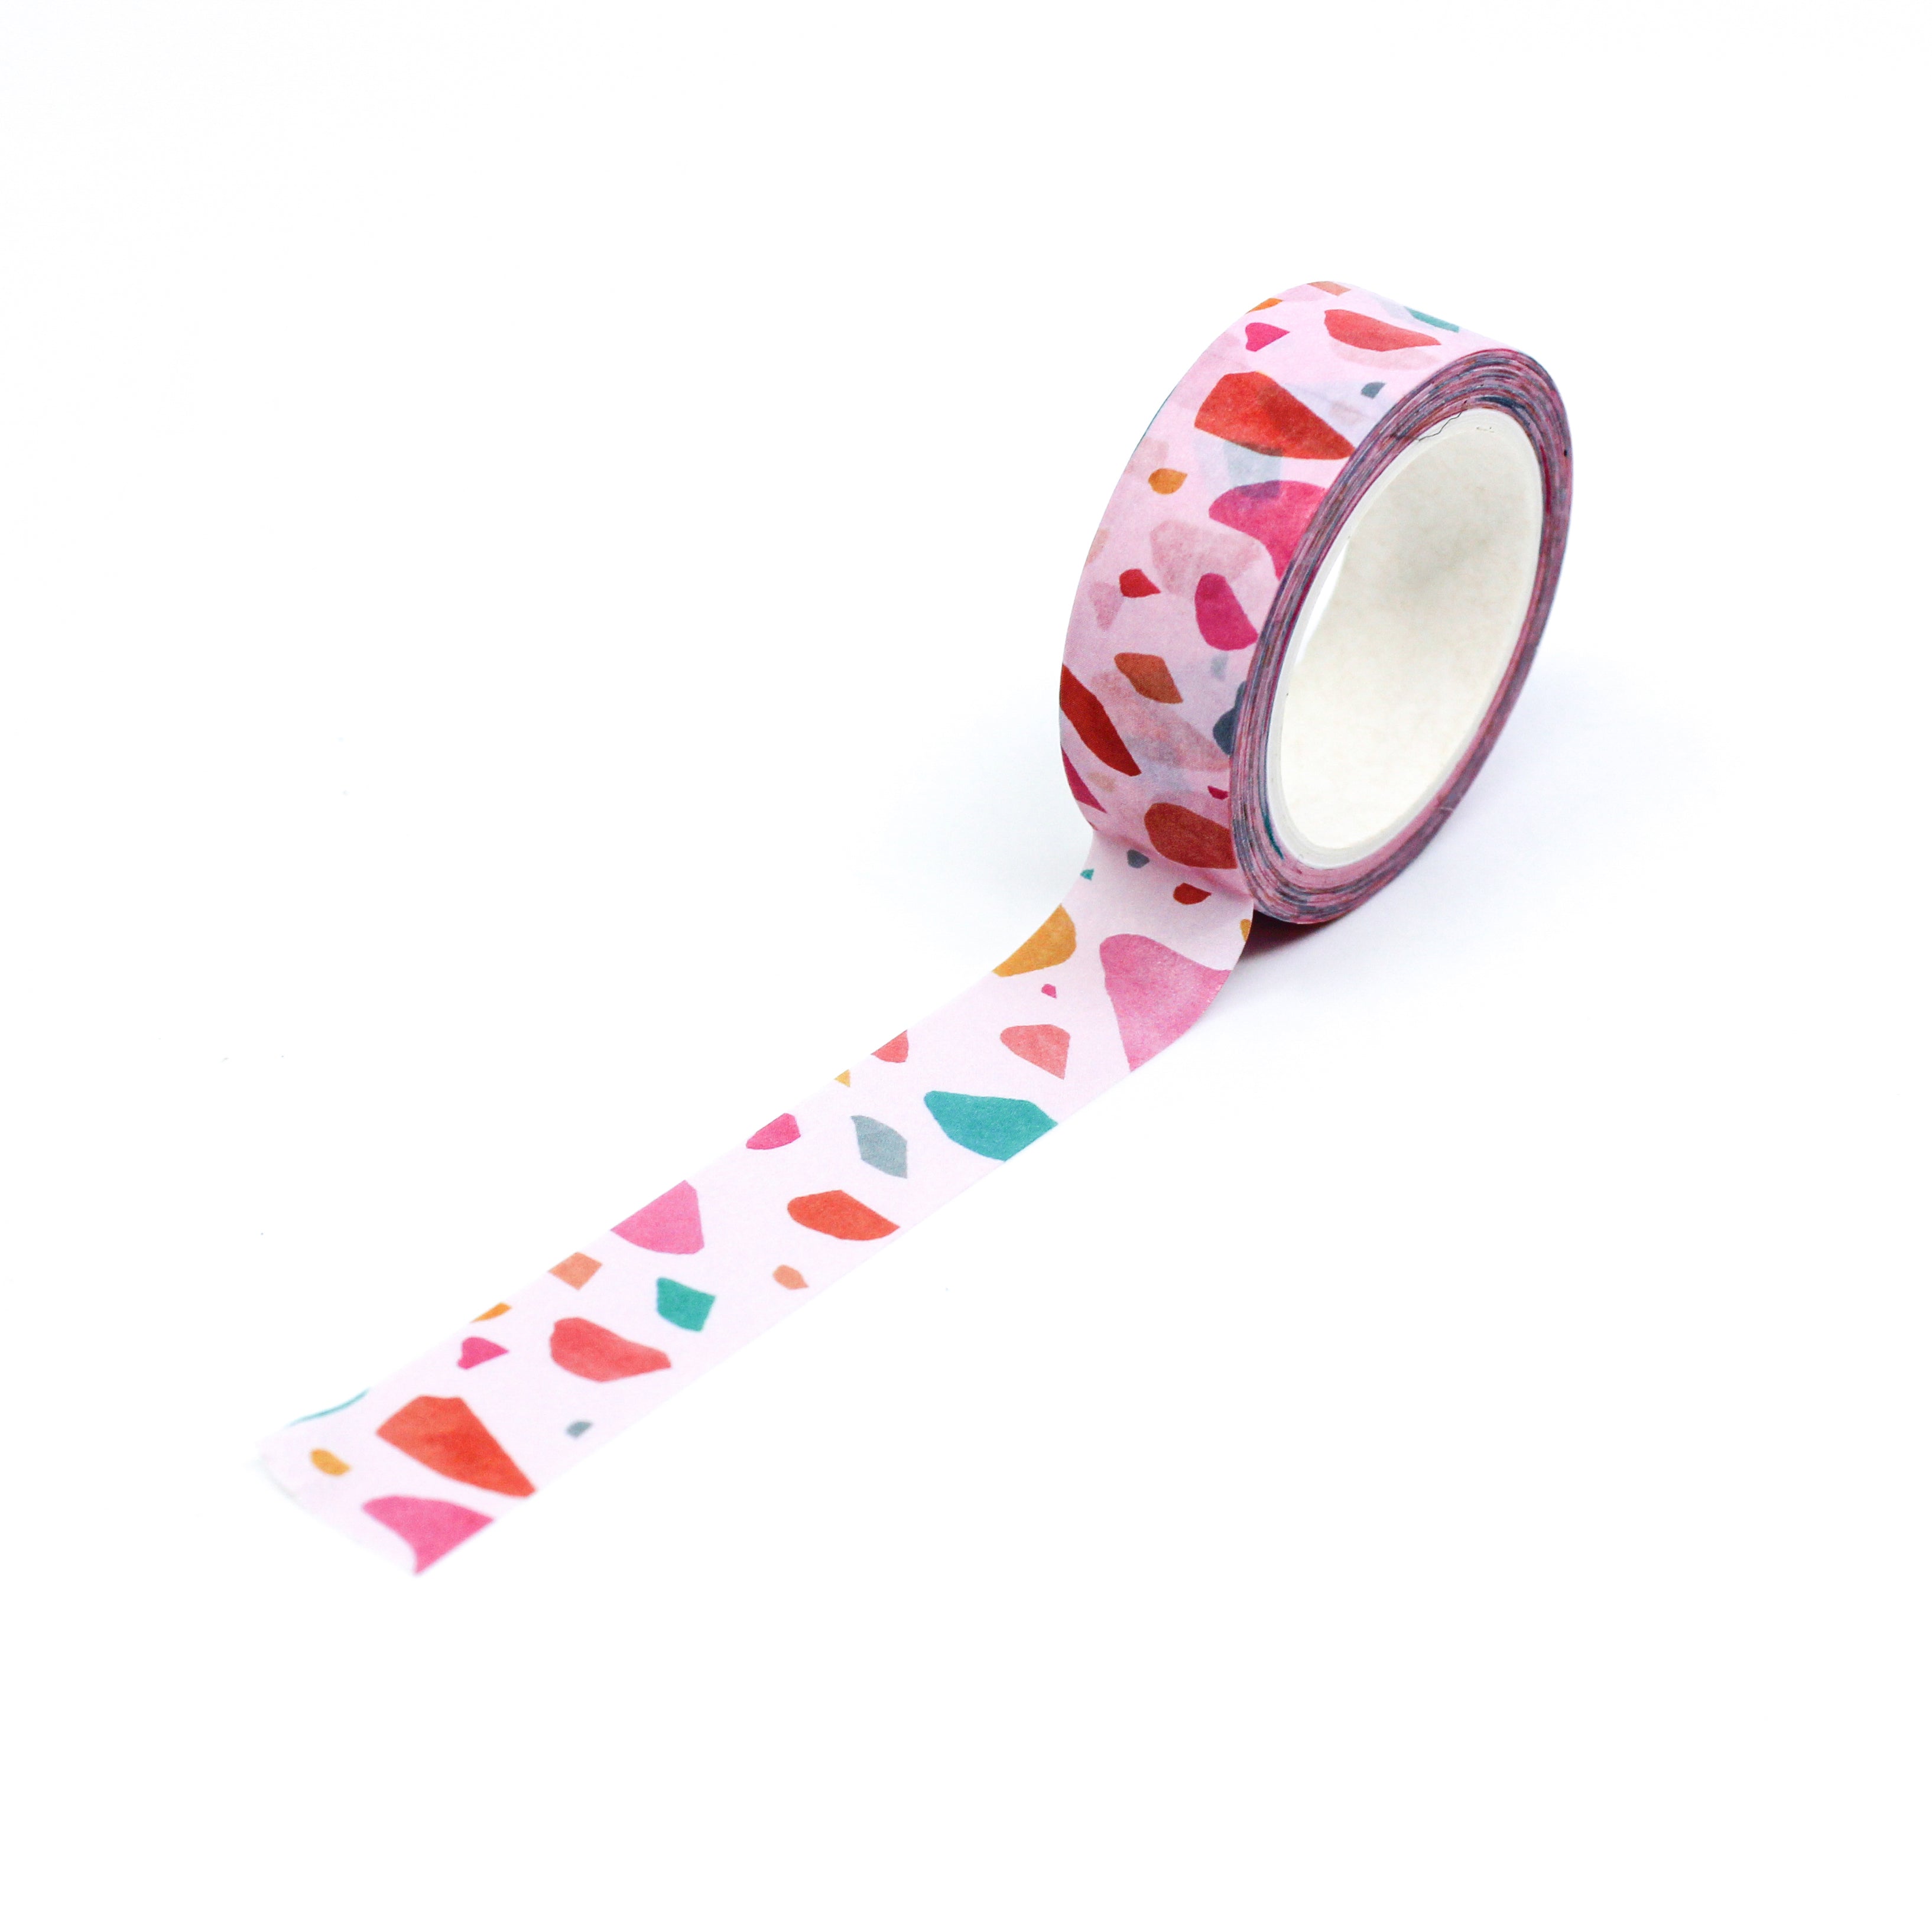 This is a full pattern repeat view of pink terrazzo washi tape from BBB Supplies Craft Shop